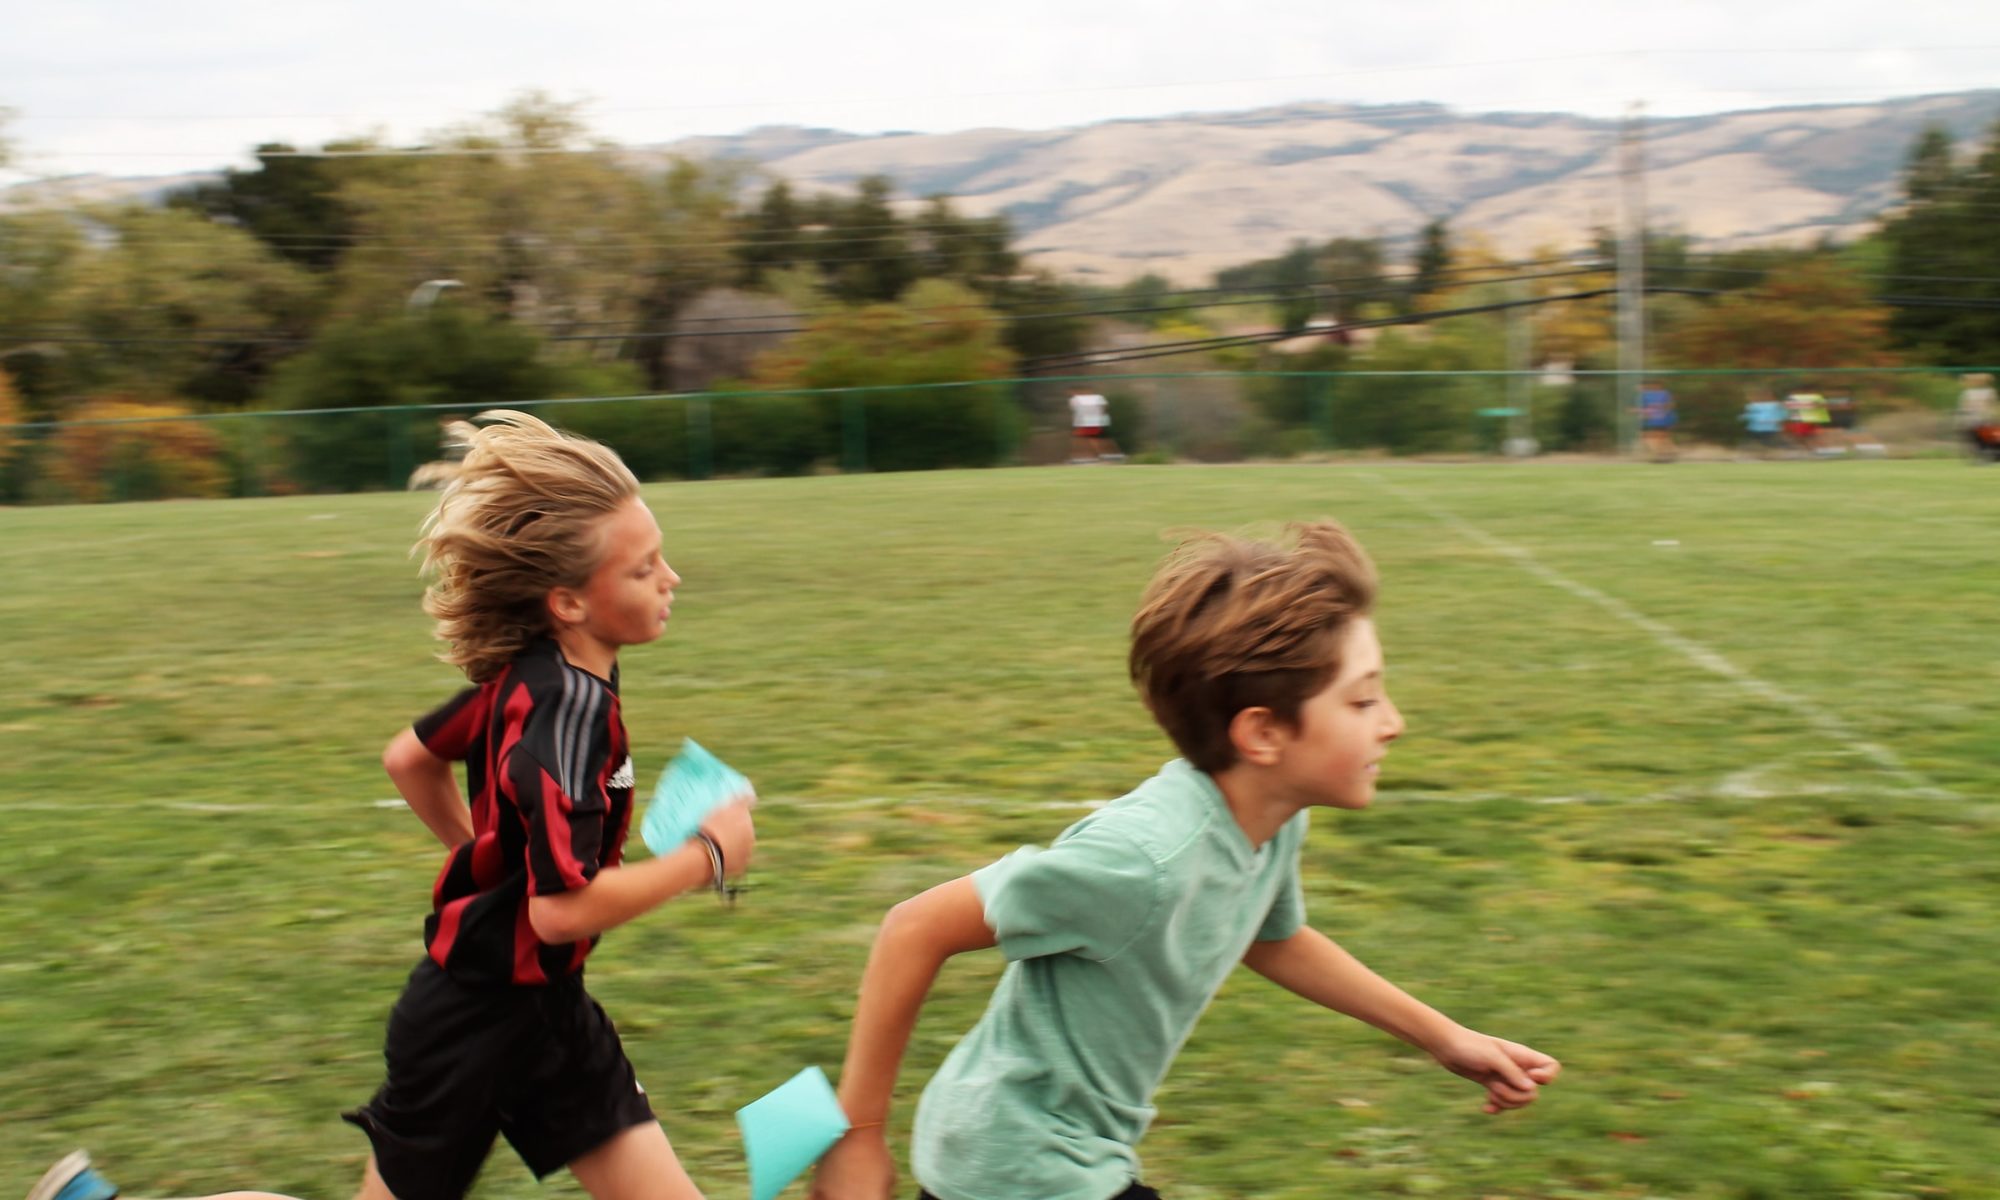 Two children run together on a field.